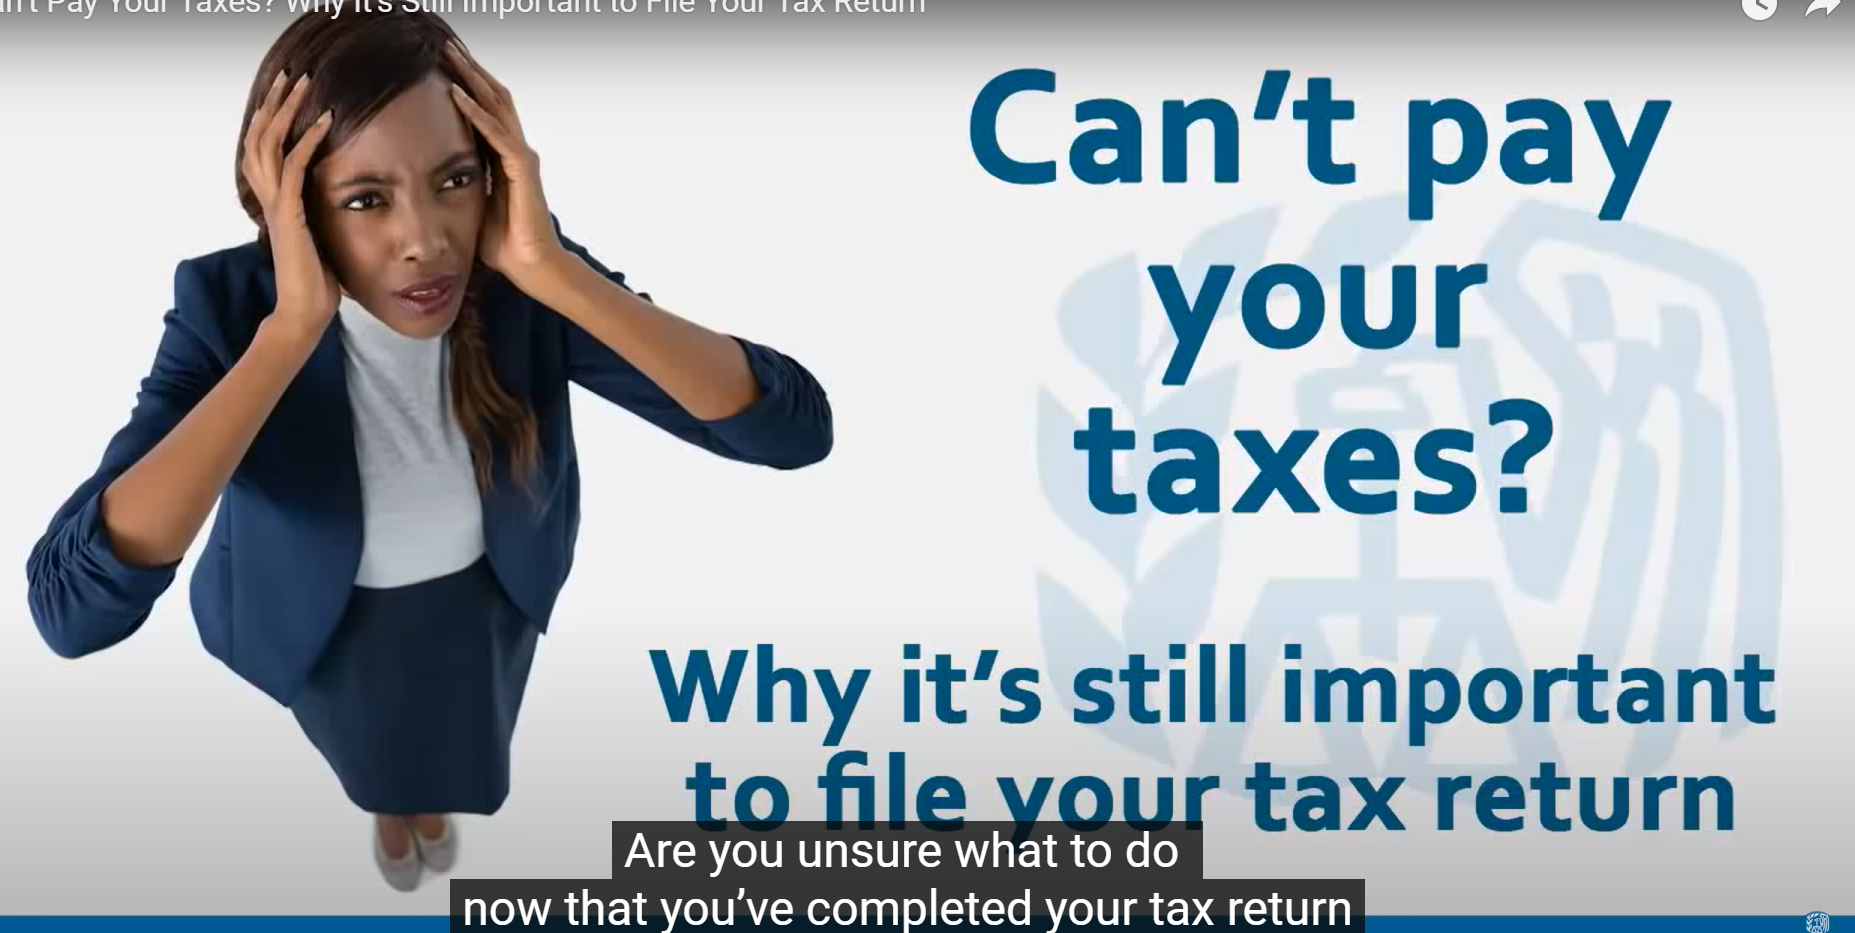 If you owe taxes but can’t pay, be sure to file a tax return on time to avoid the failure to file penalty